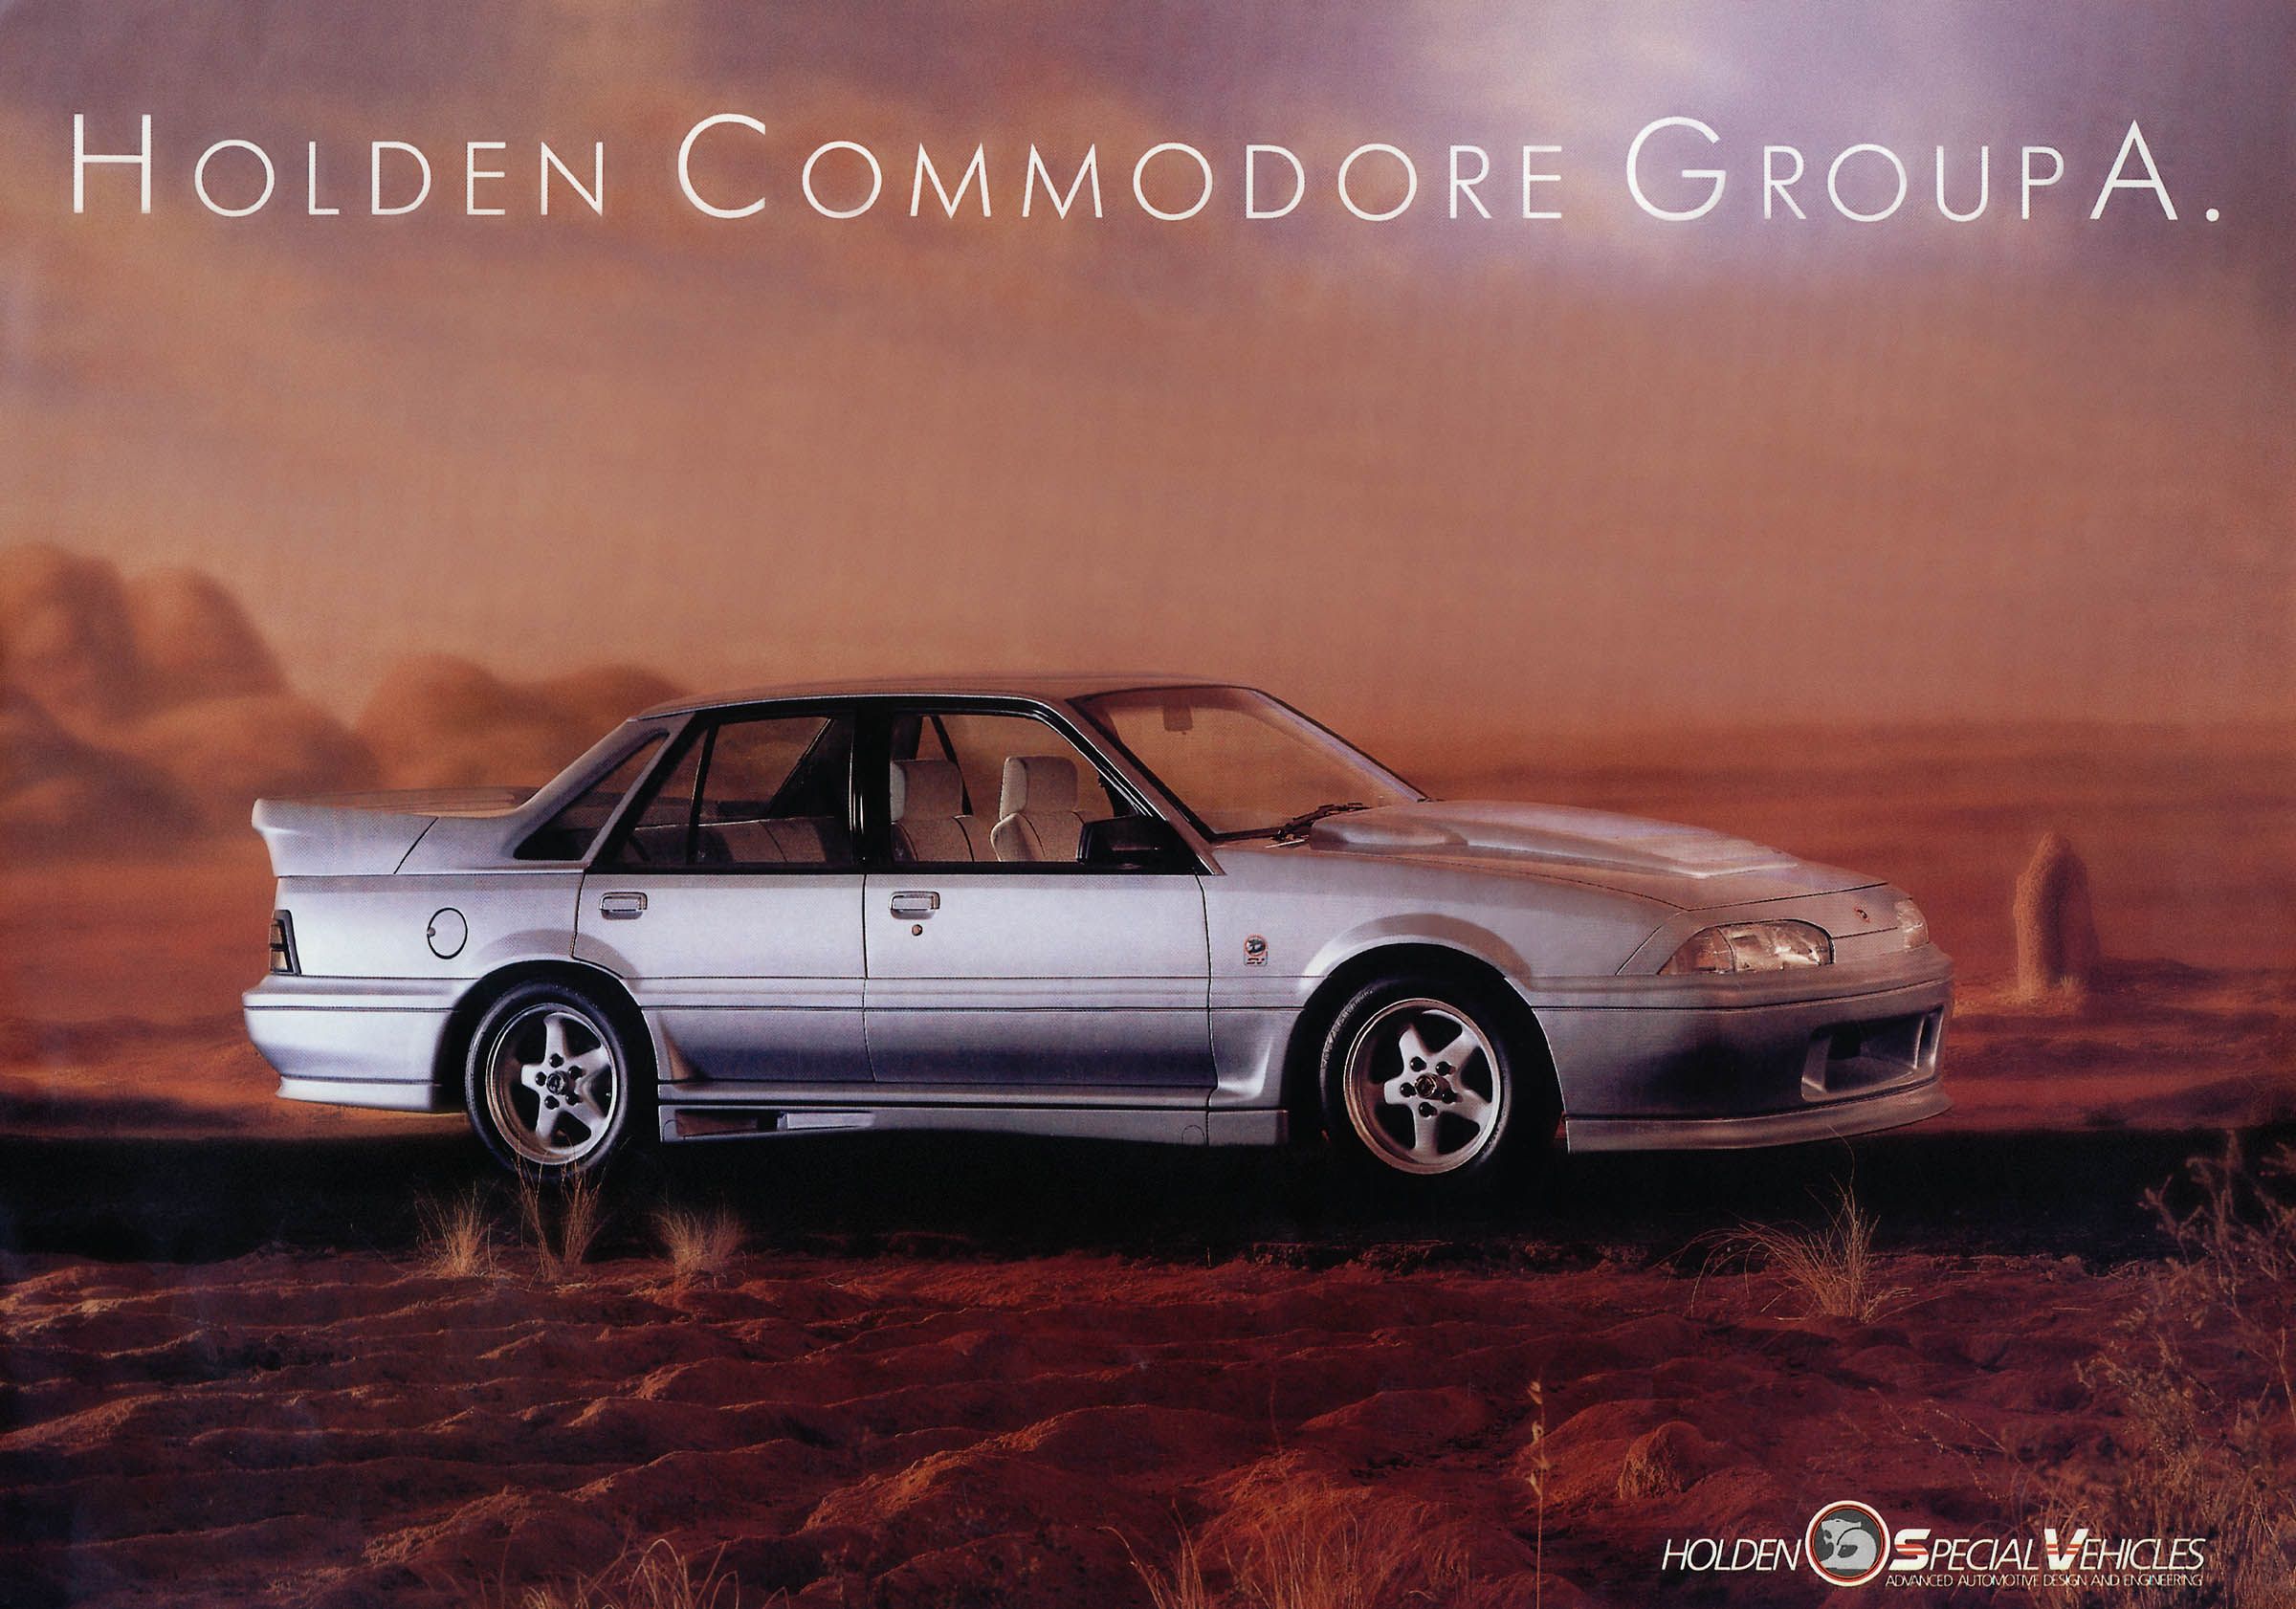 Remembering GM Holden's Most Iconic Cars